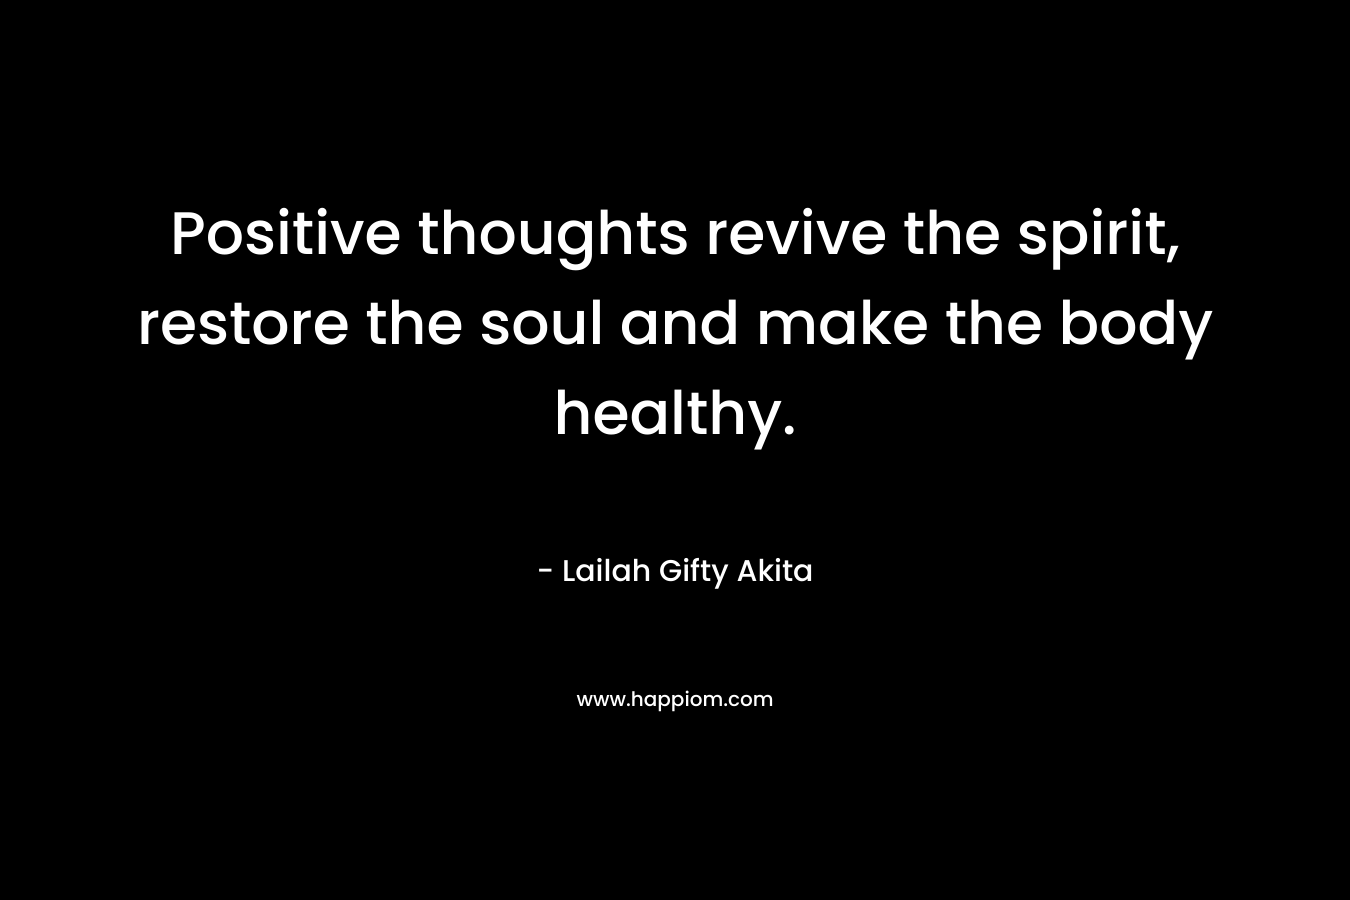 Positive thoughts revive the spirit, restore the soul and make the body healthy.